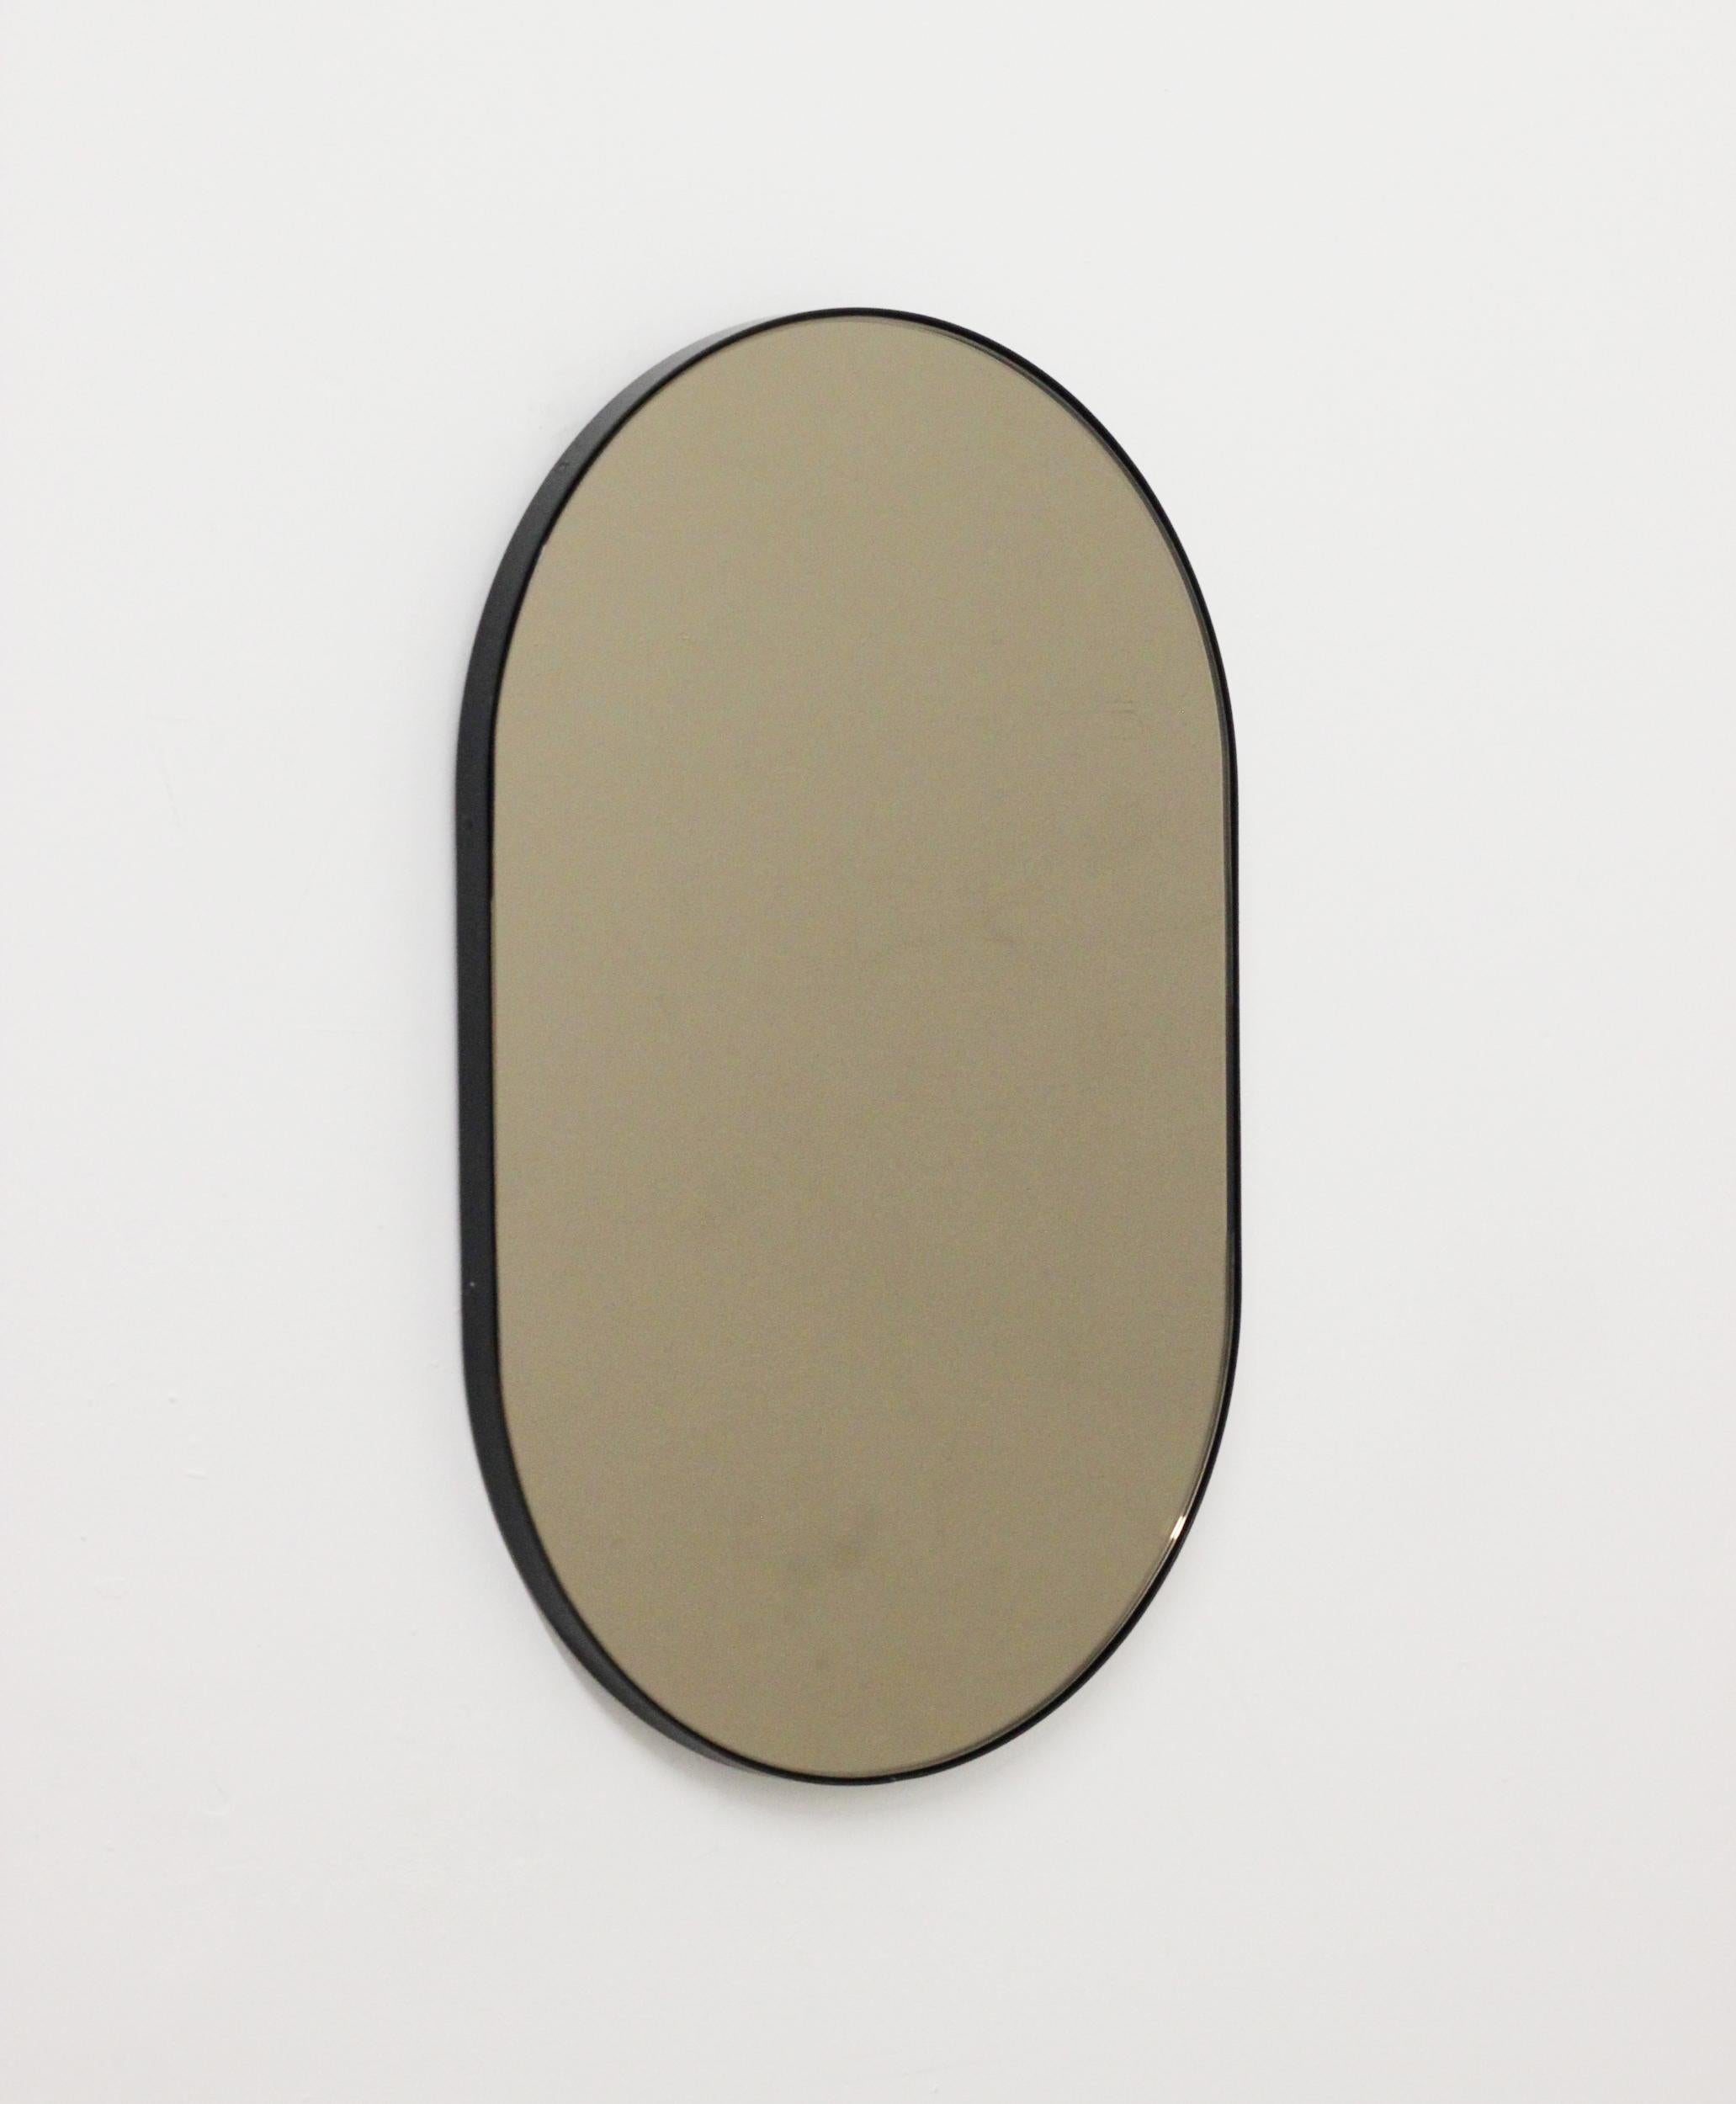 Powder-Coated Capsula Capsule shaped Bronze Contemporary Mirror with Black Frame, Large For Sale